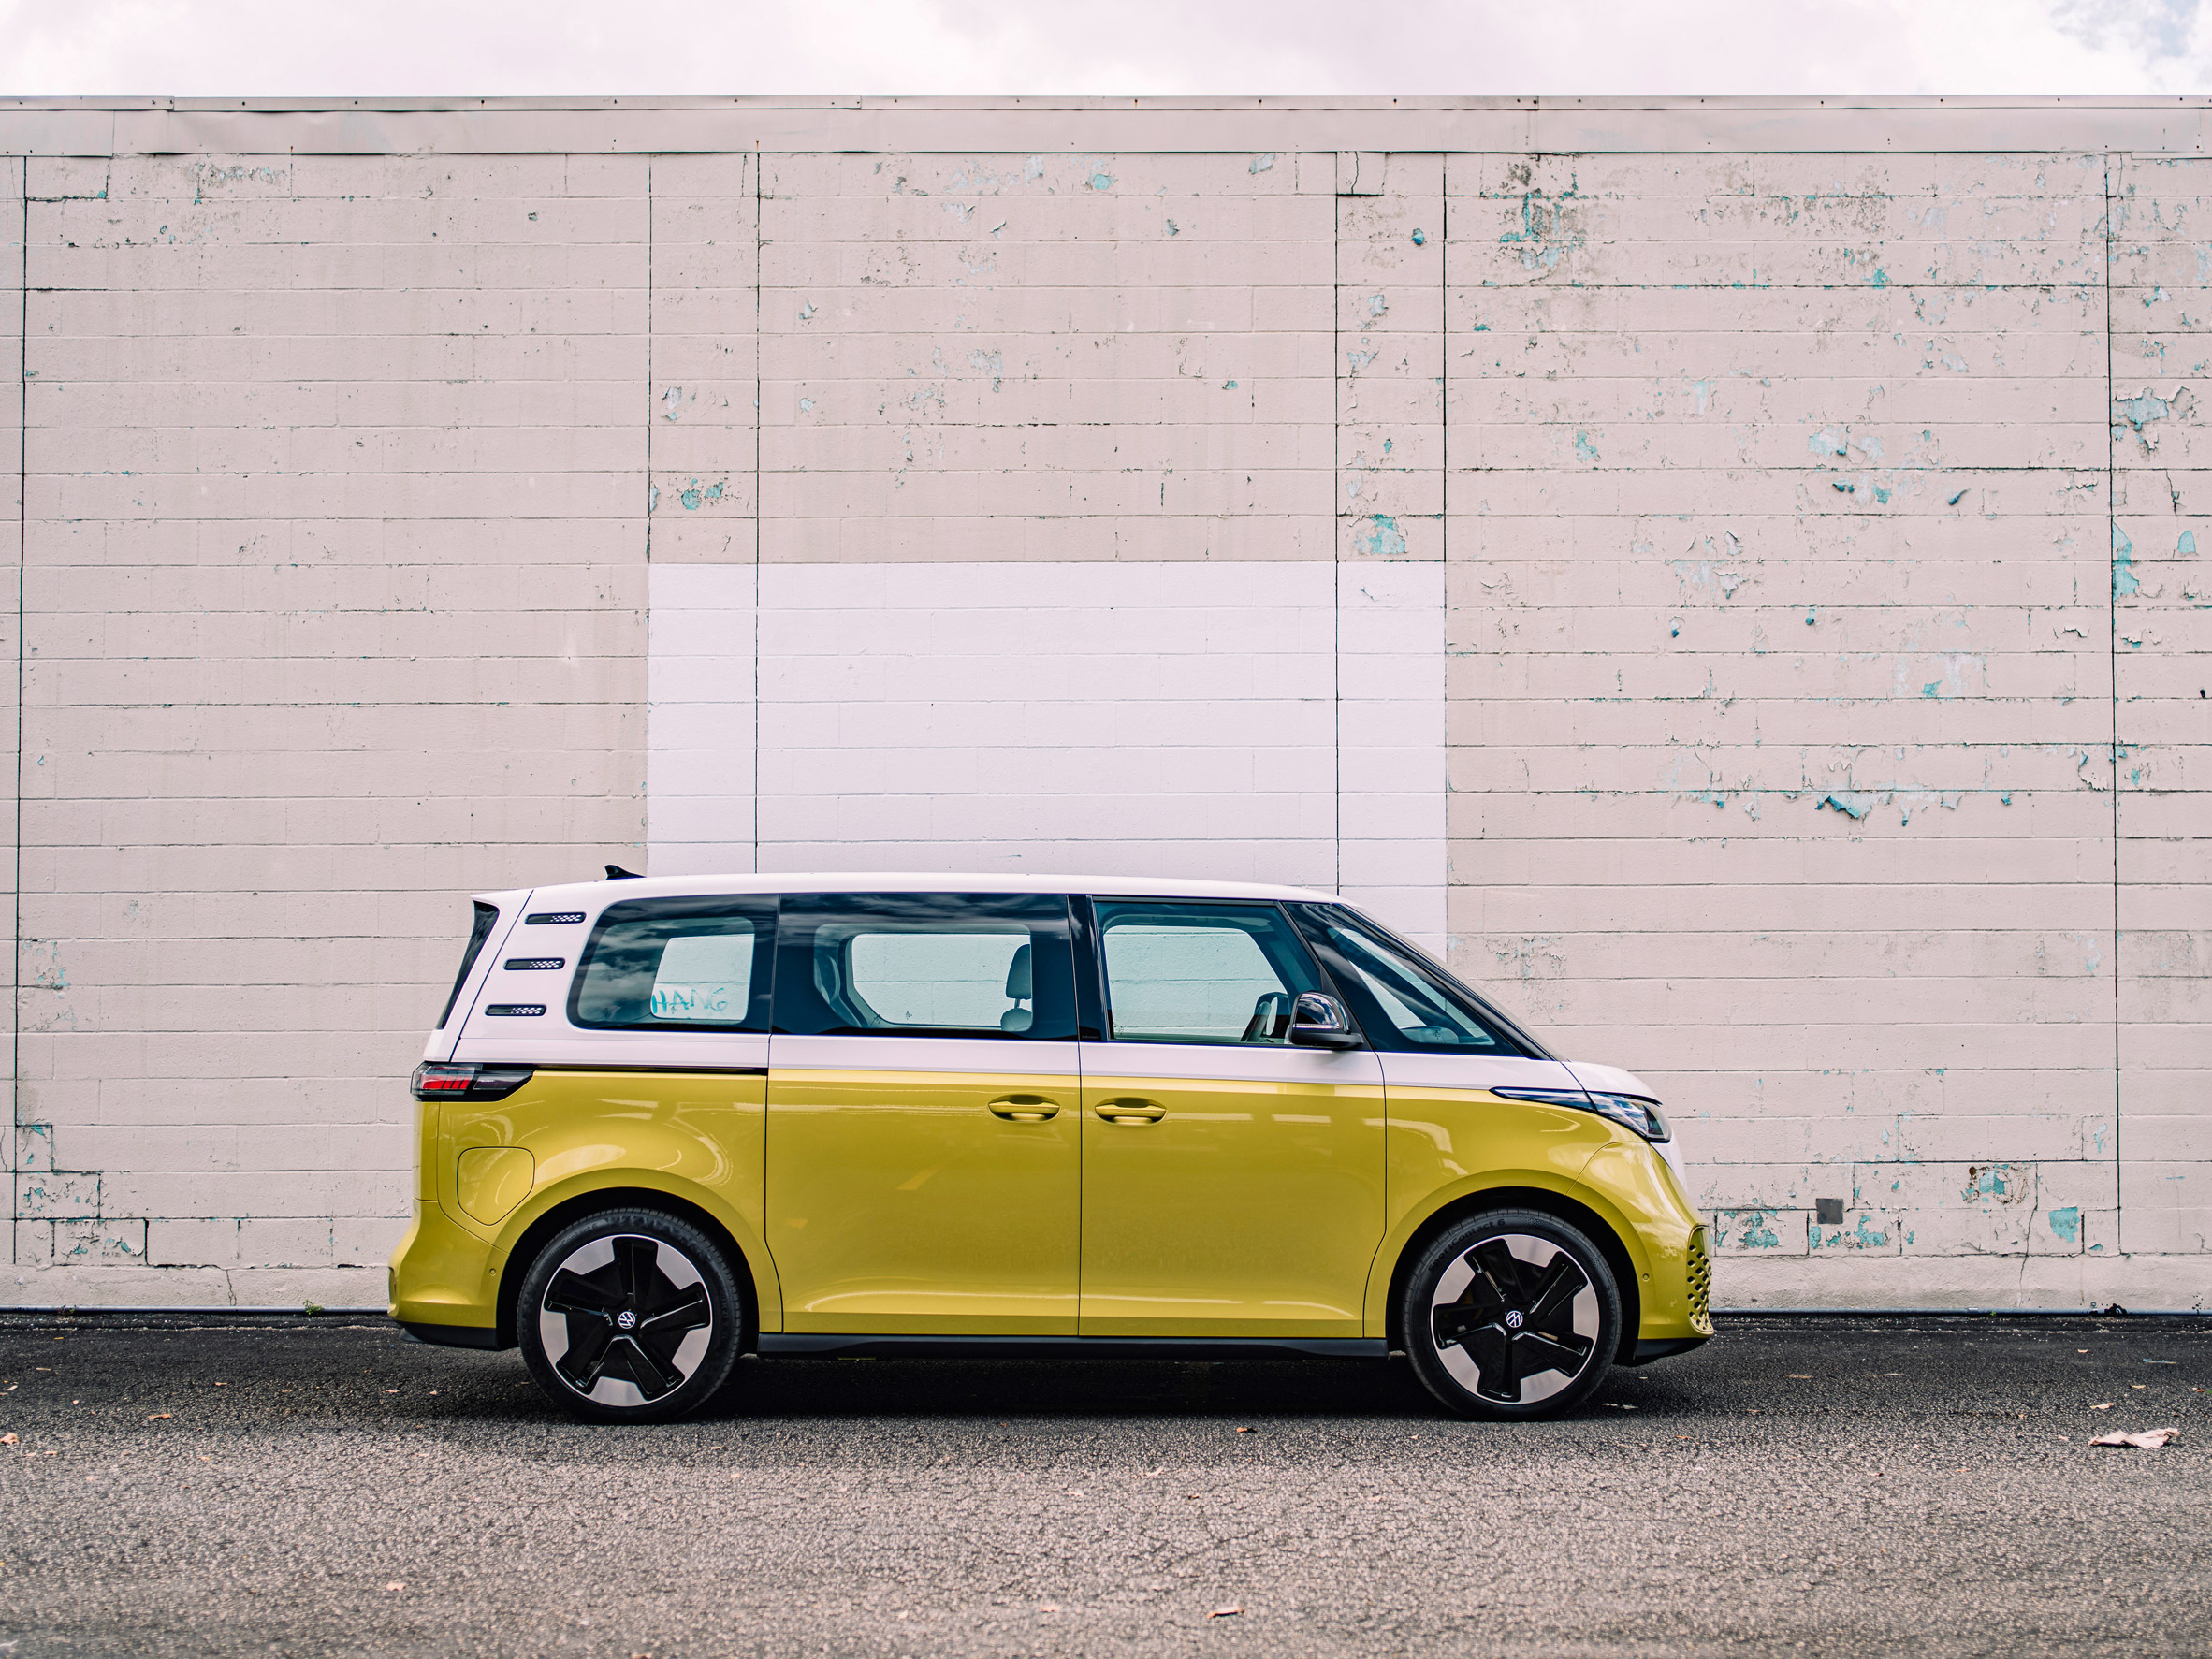 Yellow Volkswagen minivan parked by a white wall